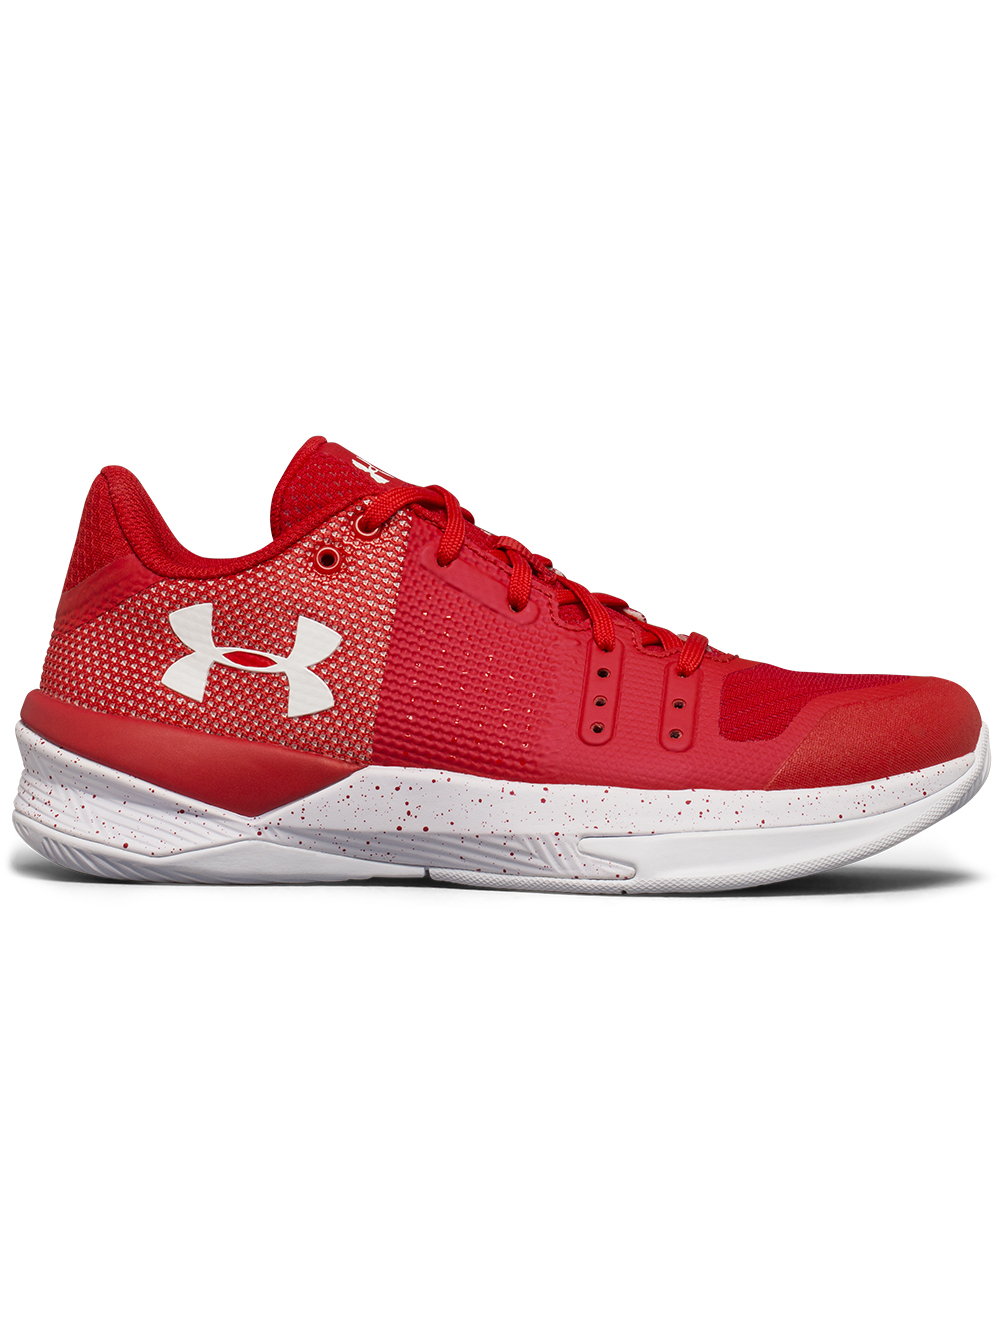 red under armour shoes women's